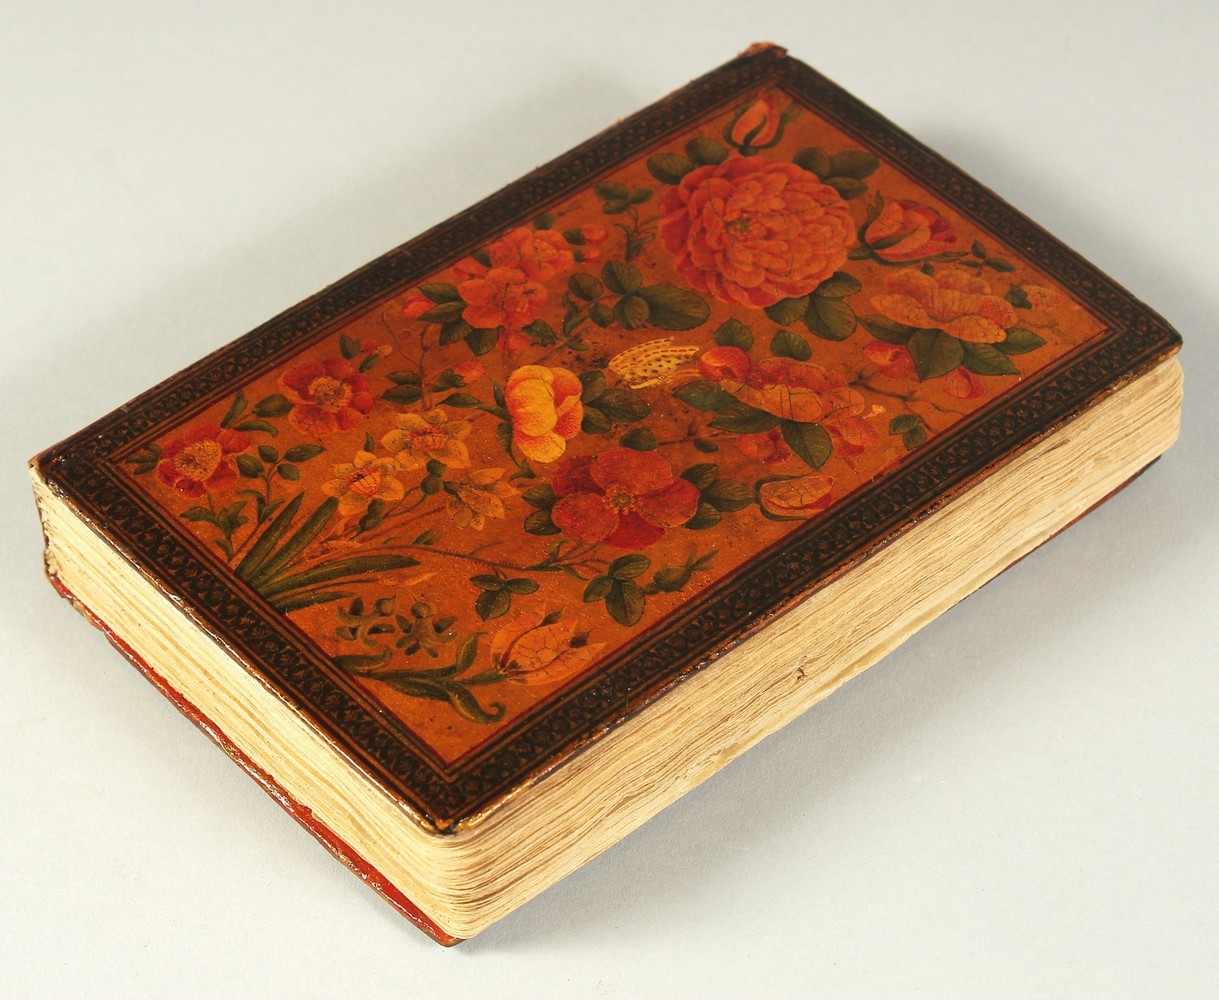 A FINE PERSIAN QAJAR LACQUERED COVER QURAN, signed and dated, the covers painted with flora, 15cm